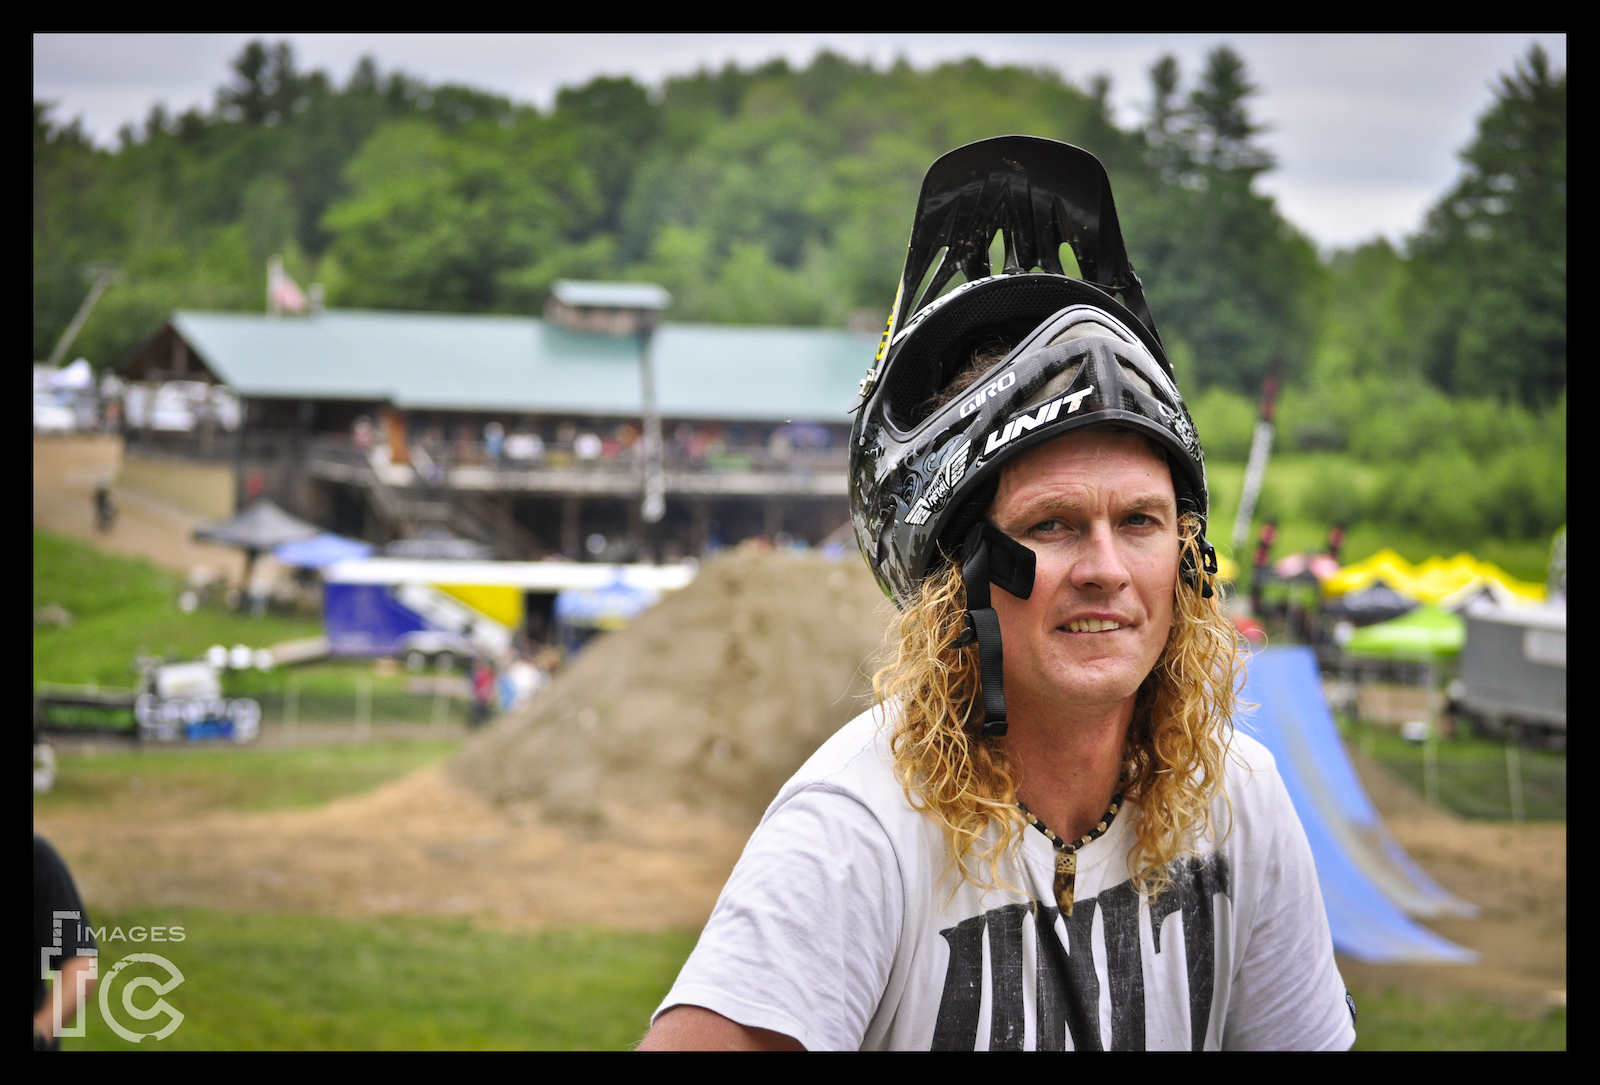 The big guy from New Zealand...Spoke with him a couple times at this event and at the U.S. Open earlier in the season, such a motivated rider.